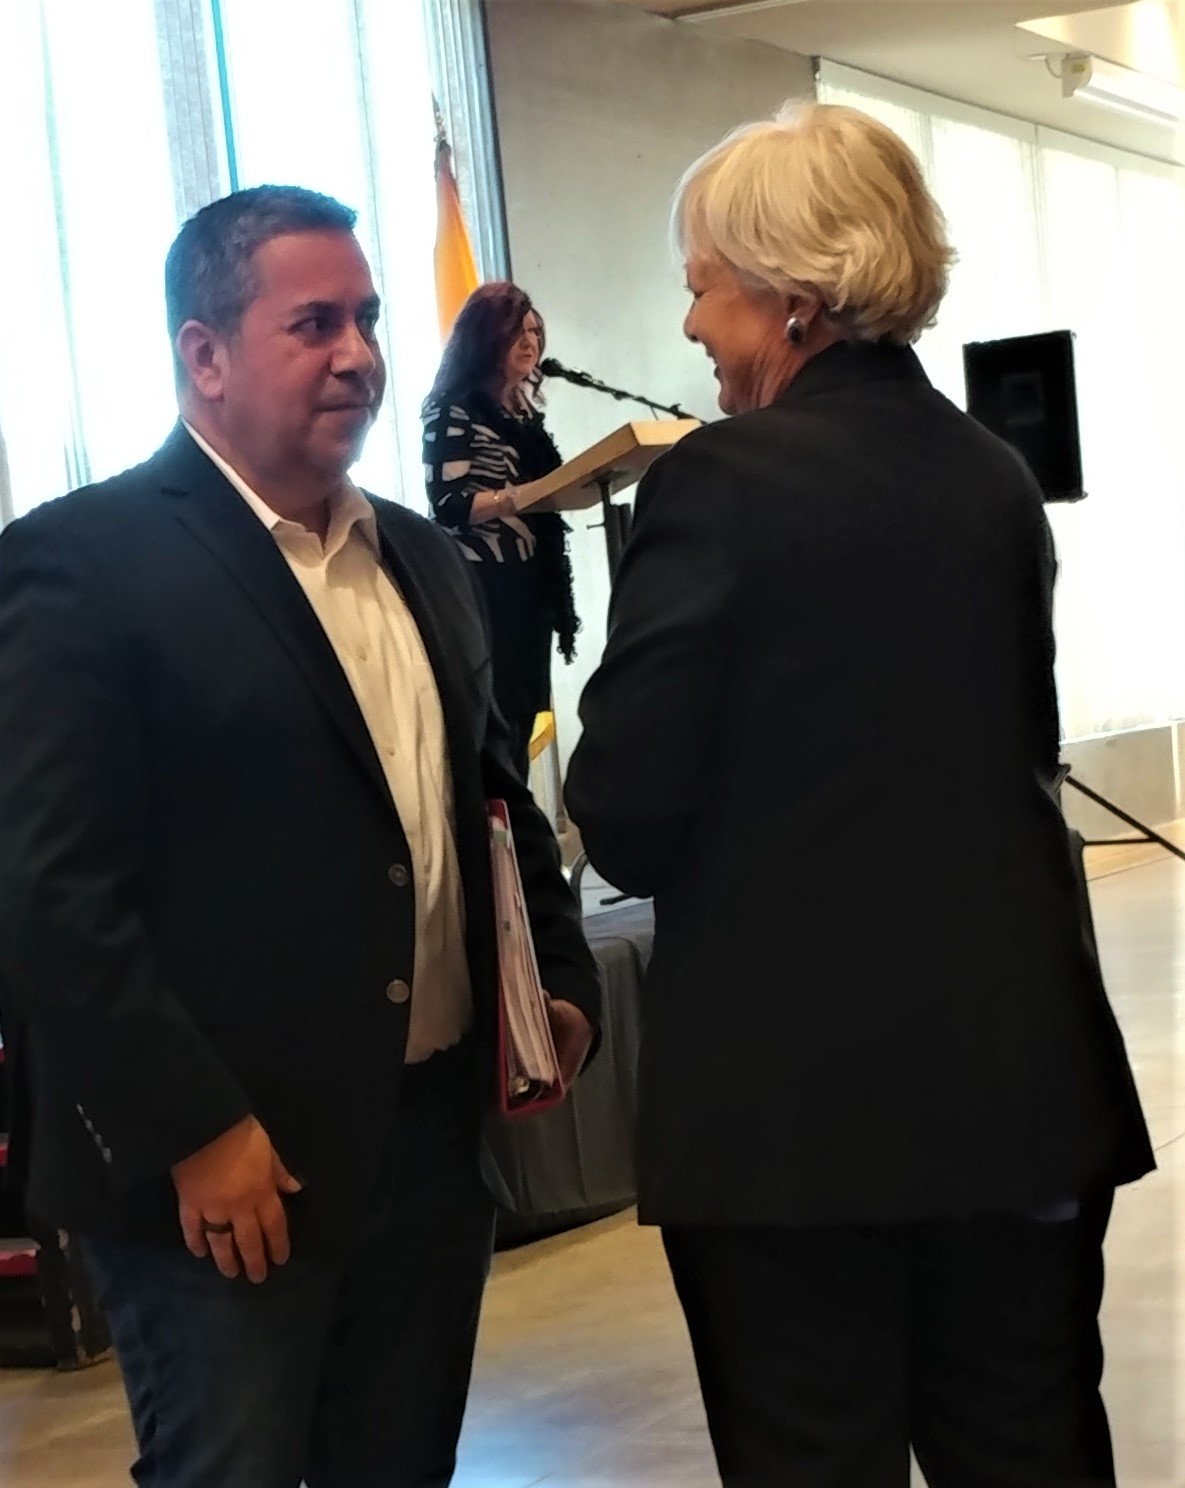 State Rep. Joanne Ferrary of Las Cruces talks to U.S. Sen. Ben Ray Lujan at the Greater Las Cruces Chamber of Commerce’s legislative sendoff luncheon Jan. 11 at the New Mexico Farm & Ranch Heritage Museum.